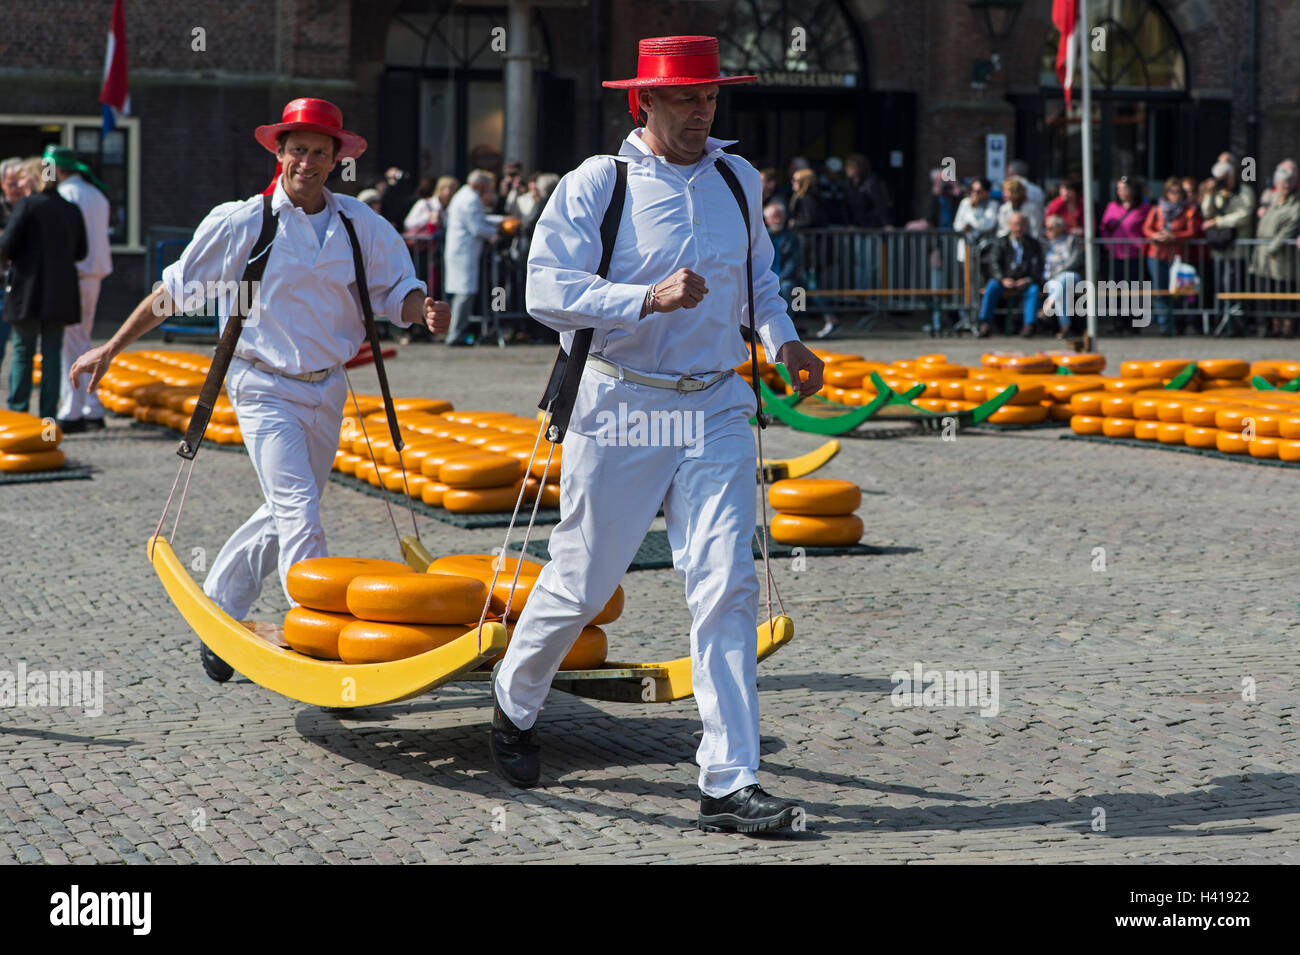 Cheese carriers at work, rituals and traditions of cheese trading presented at the cheese market of Alkmaar, Netherlands Stock Photo